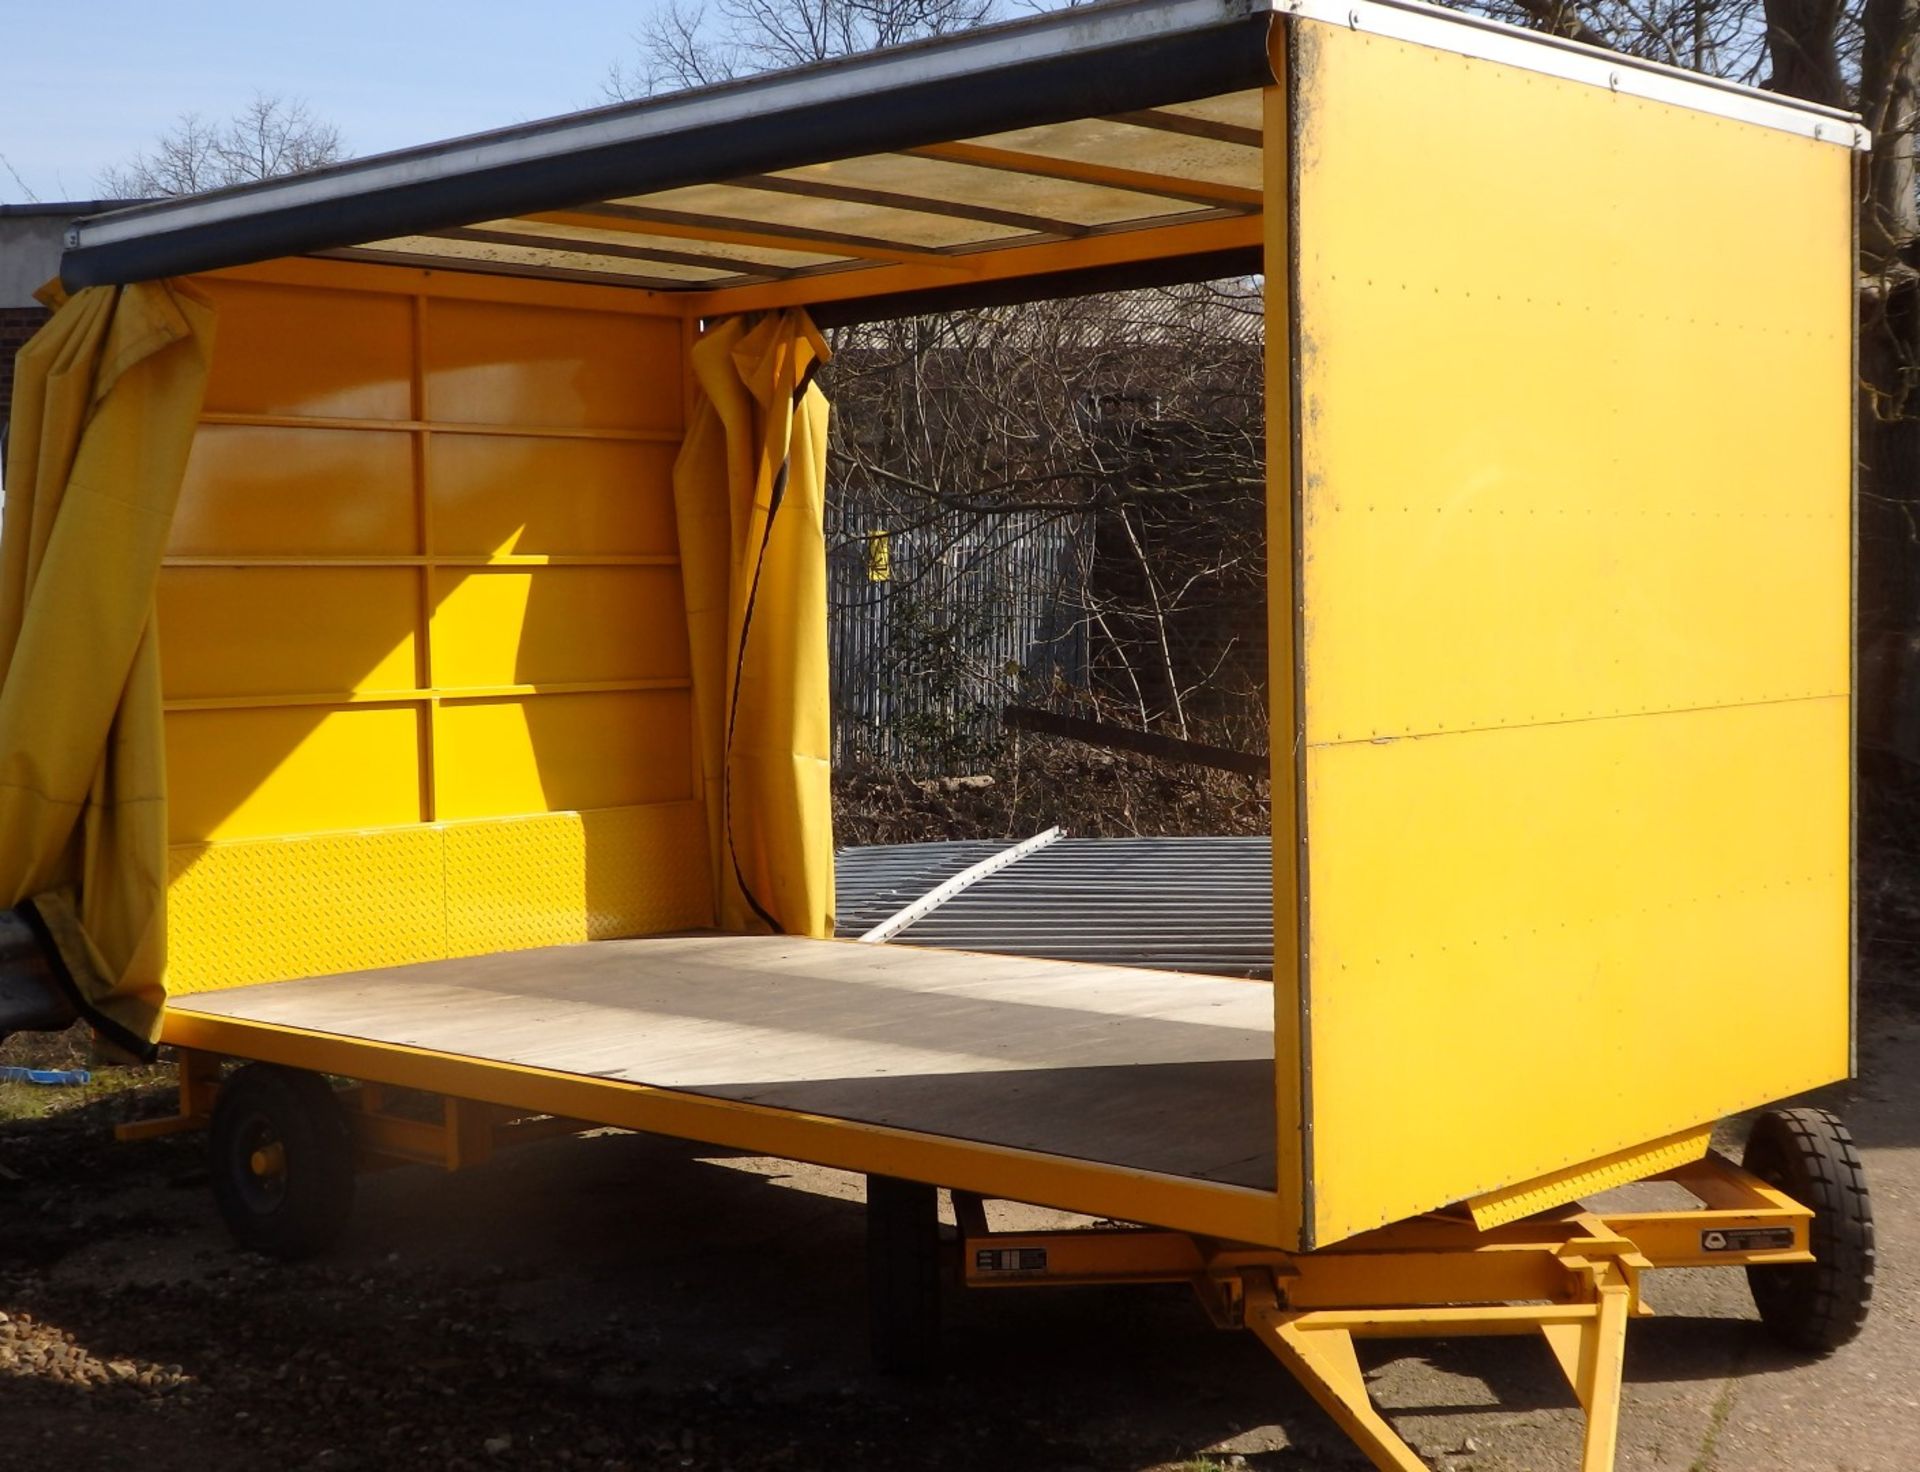 1 x Enclosed Curtain Sided Box Trailer With Turntable Steering - Alexander Trailers Model IP40ST - - Image 2 of 28